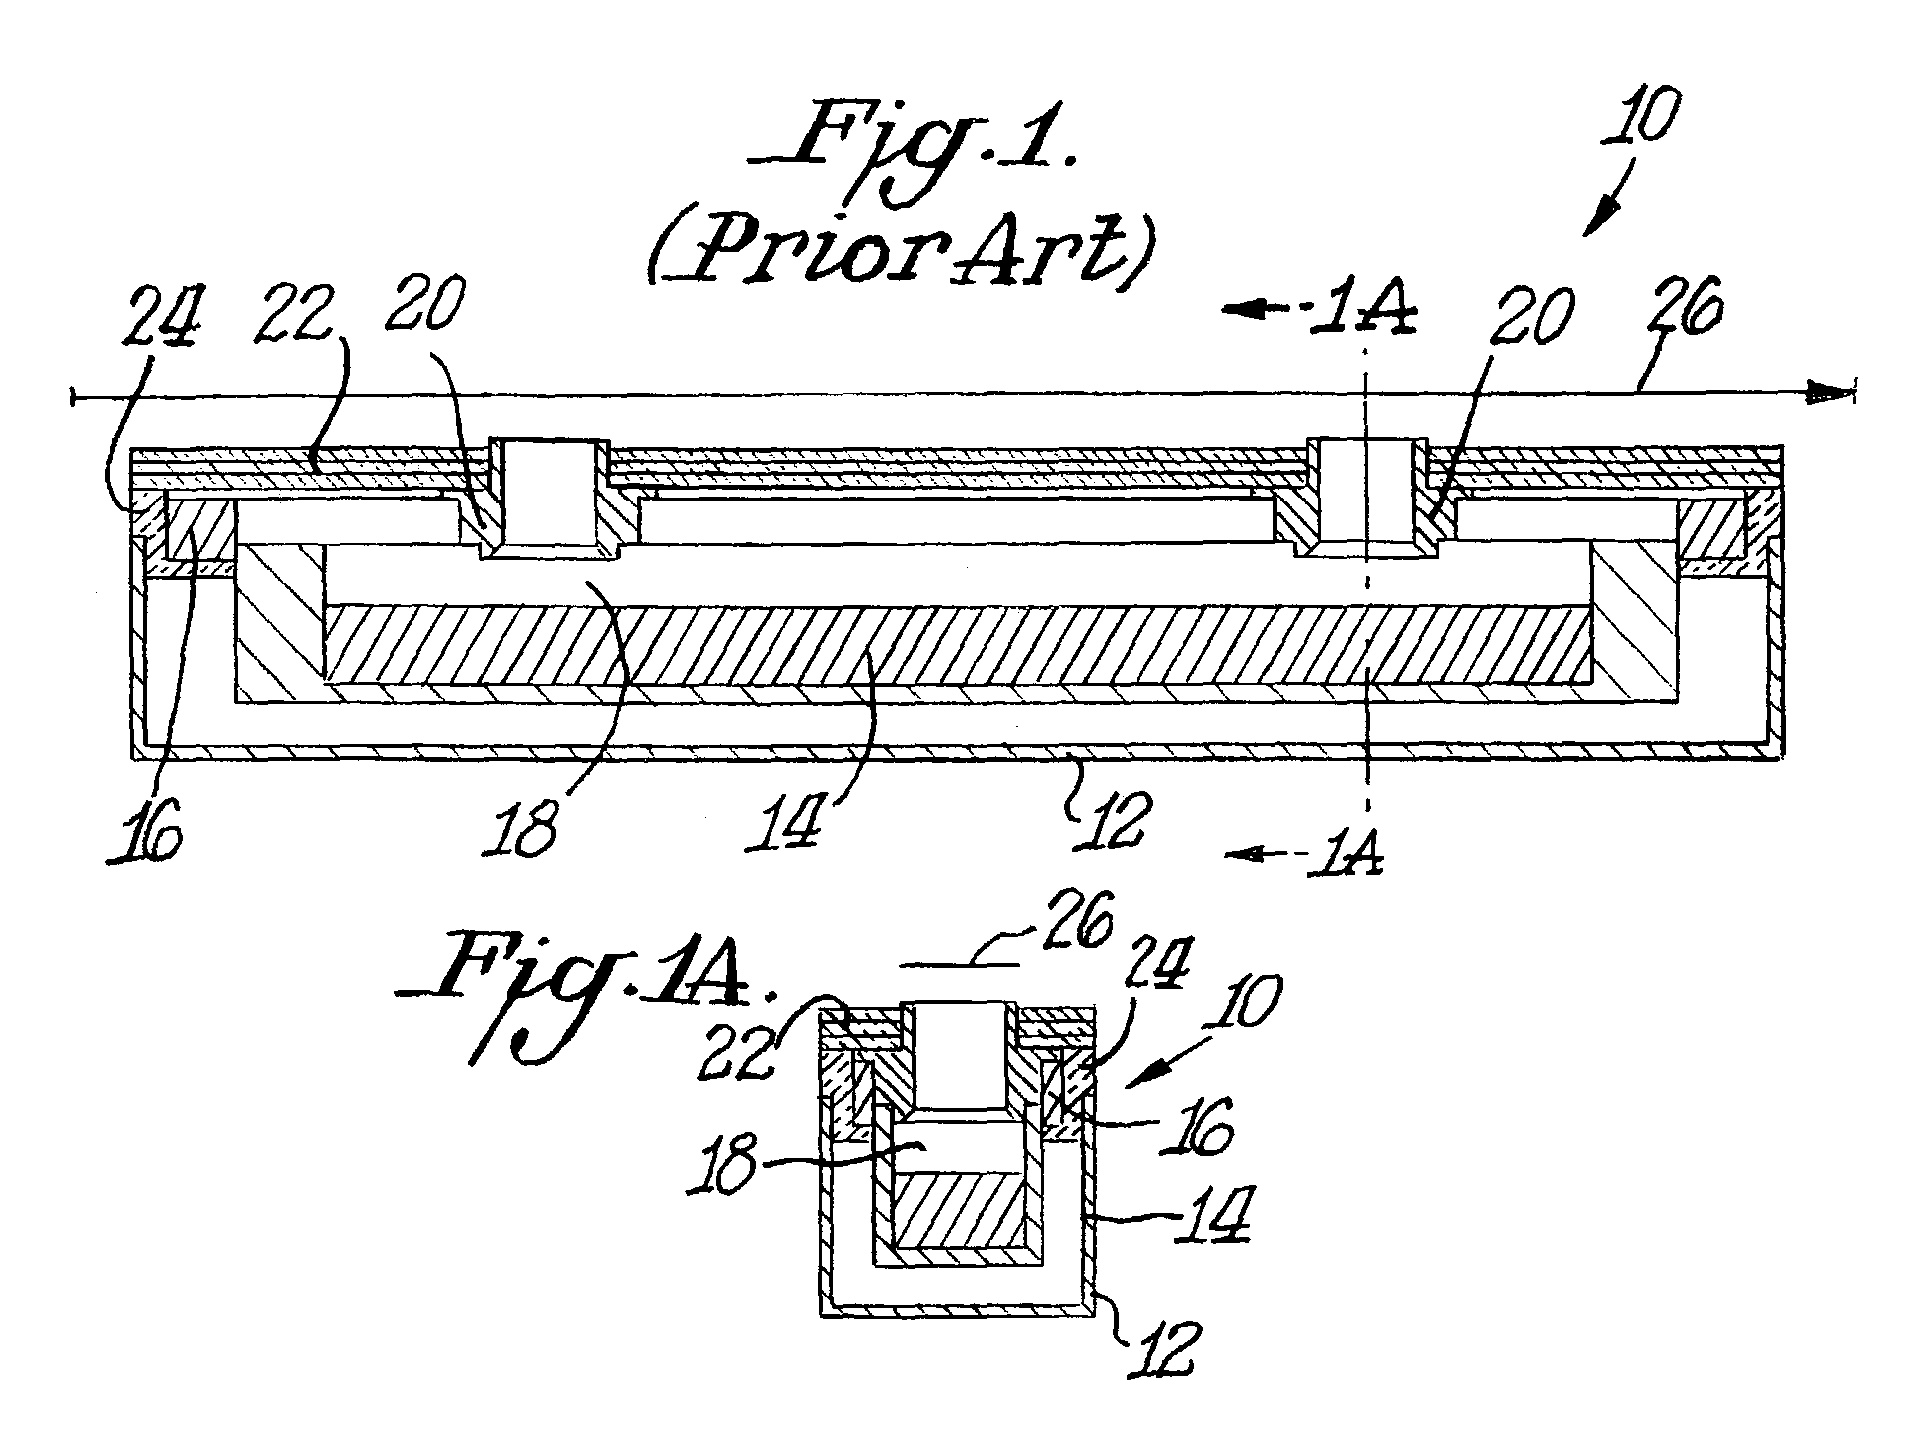 Multiple-nozzle thermal evaporation source